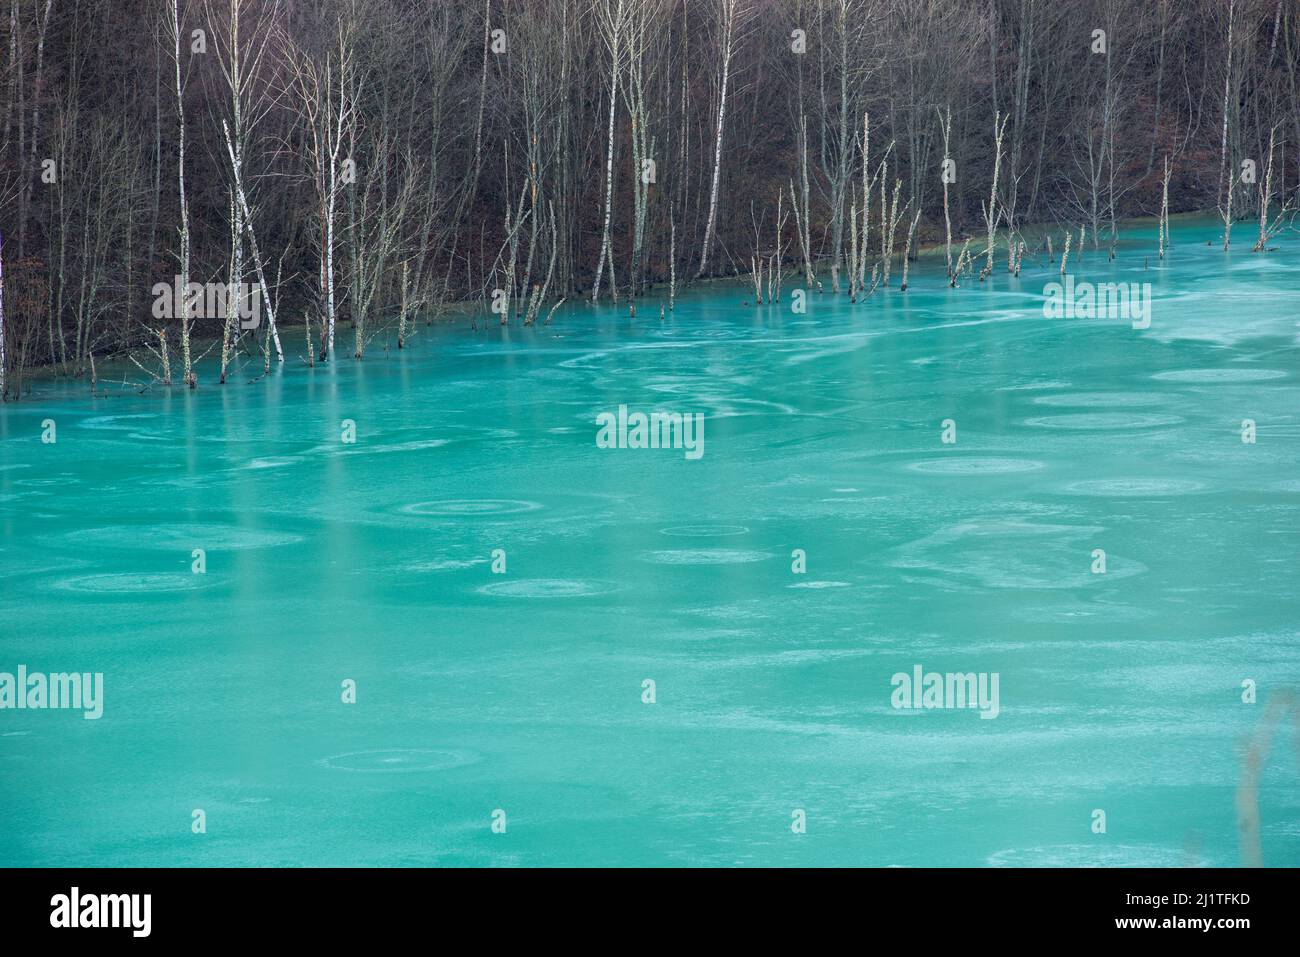 Turquoise waste waters from a copper mine polluting the environment. Geamana decantation lake, Rosia Montana, Romania Stock Photo